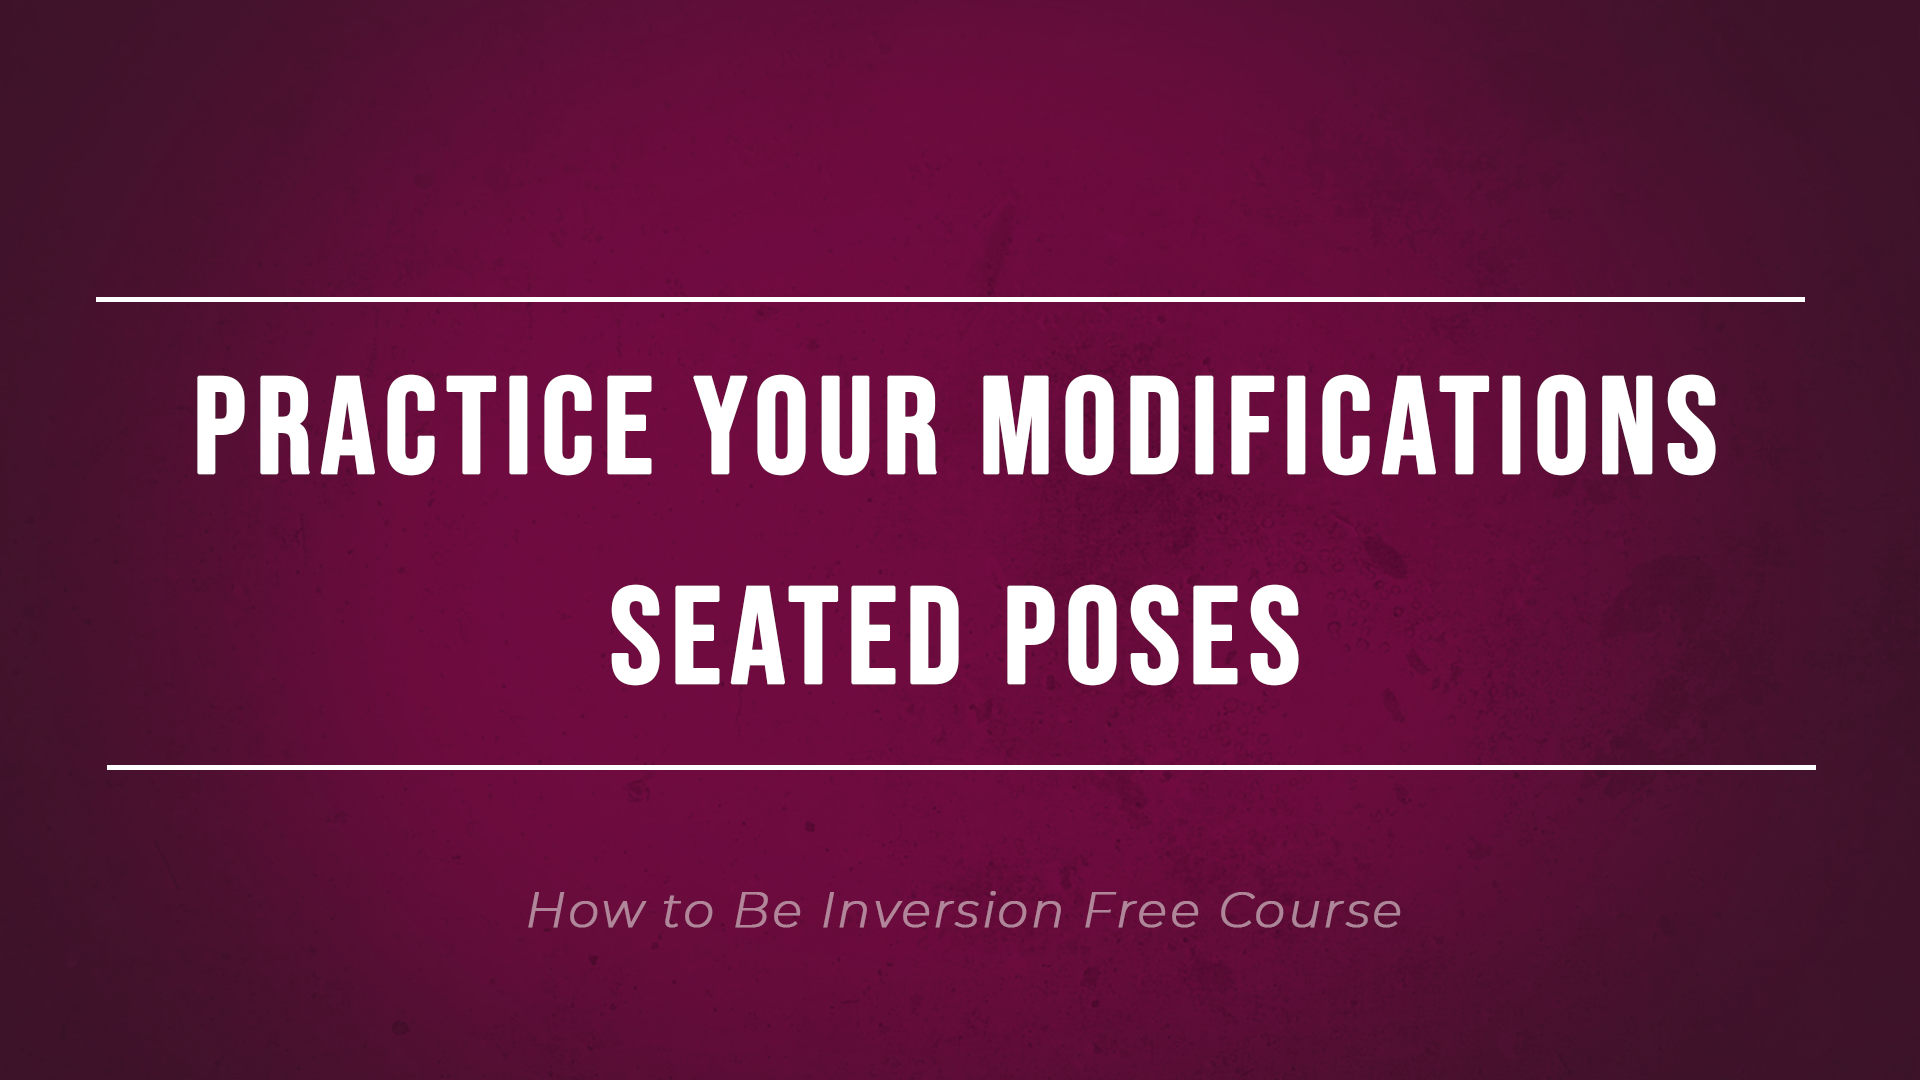 Practice Your Modifications Seated Poses